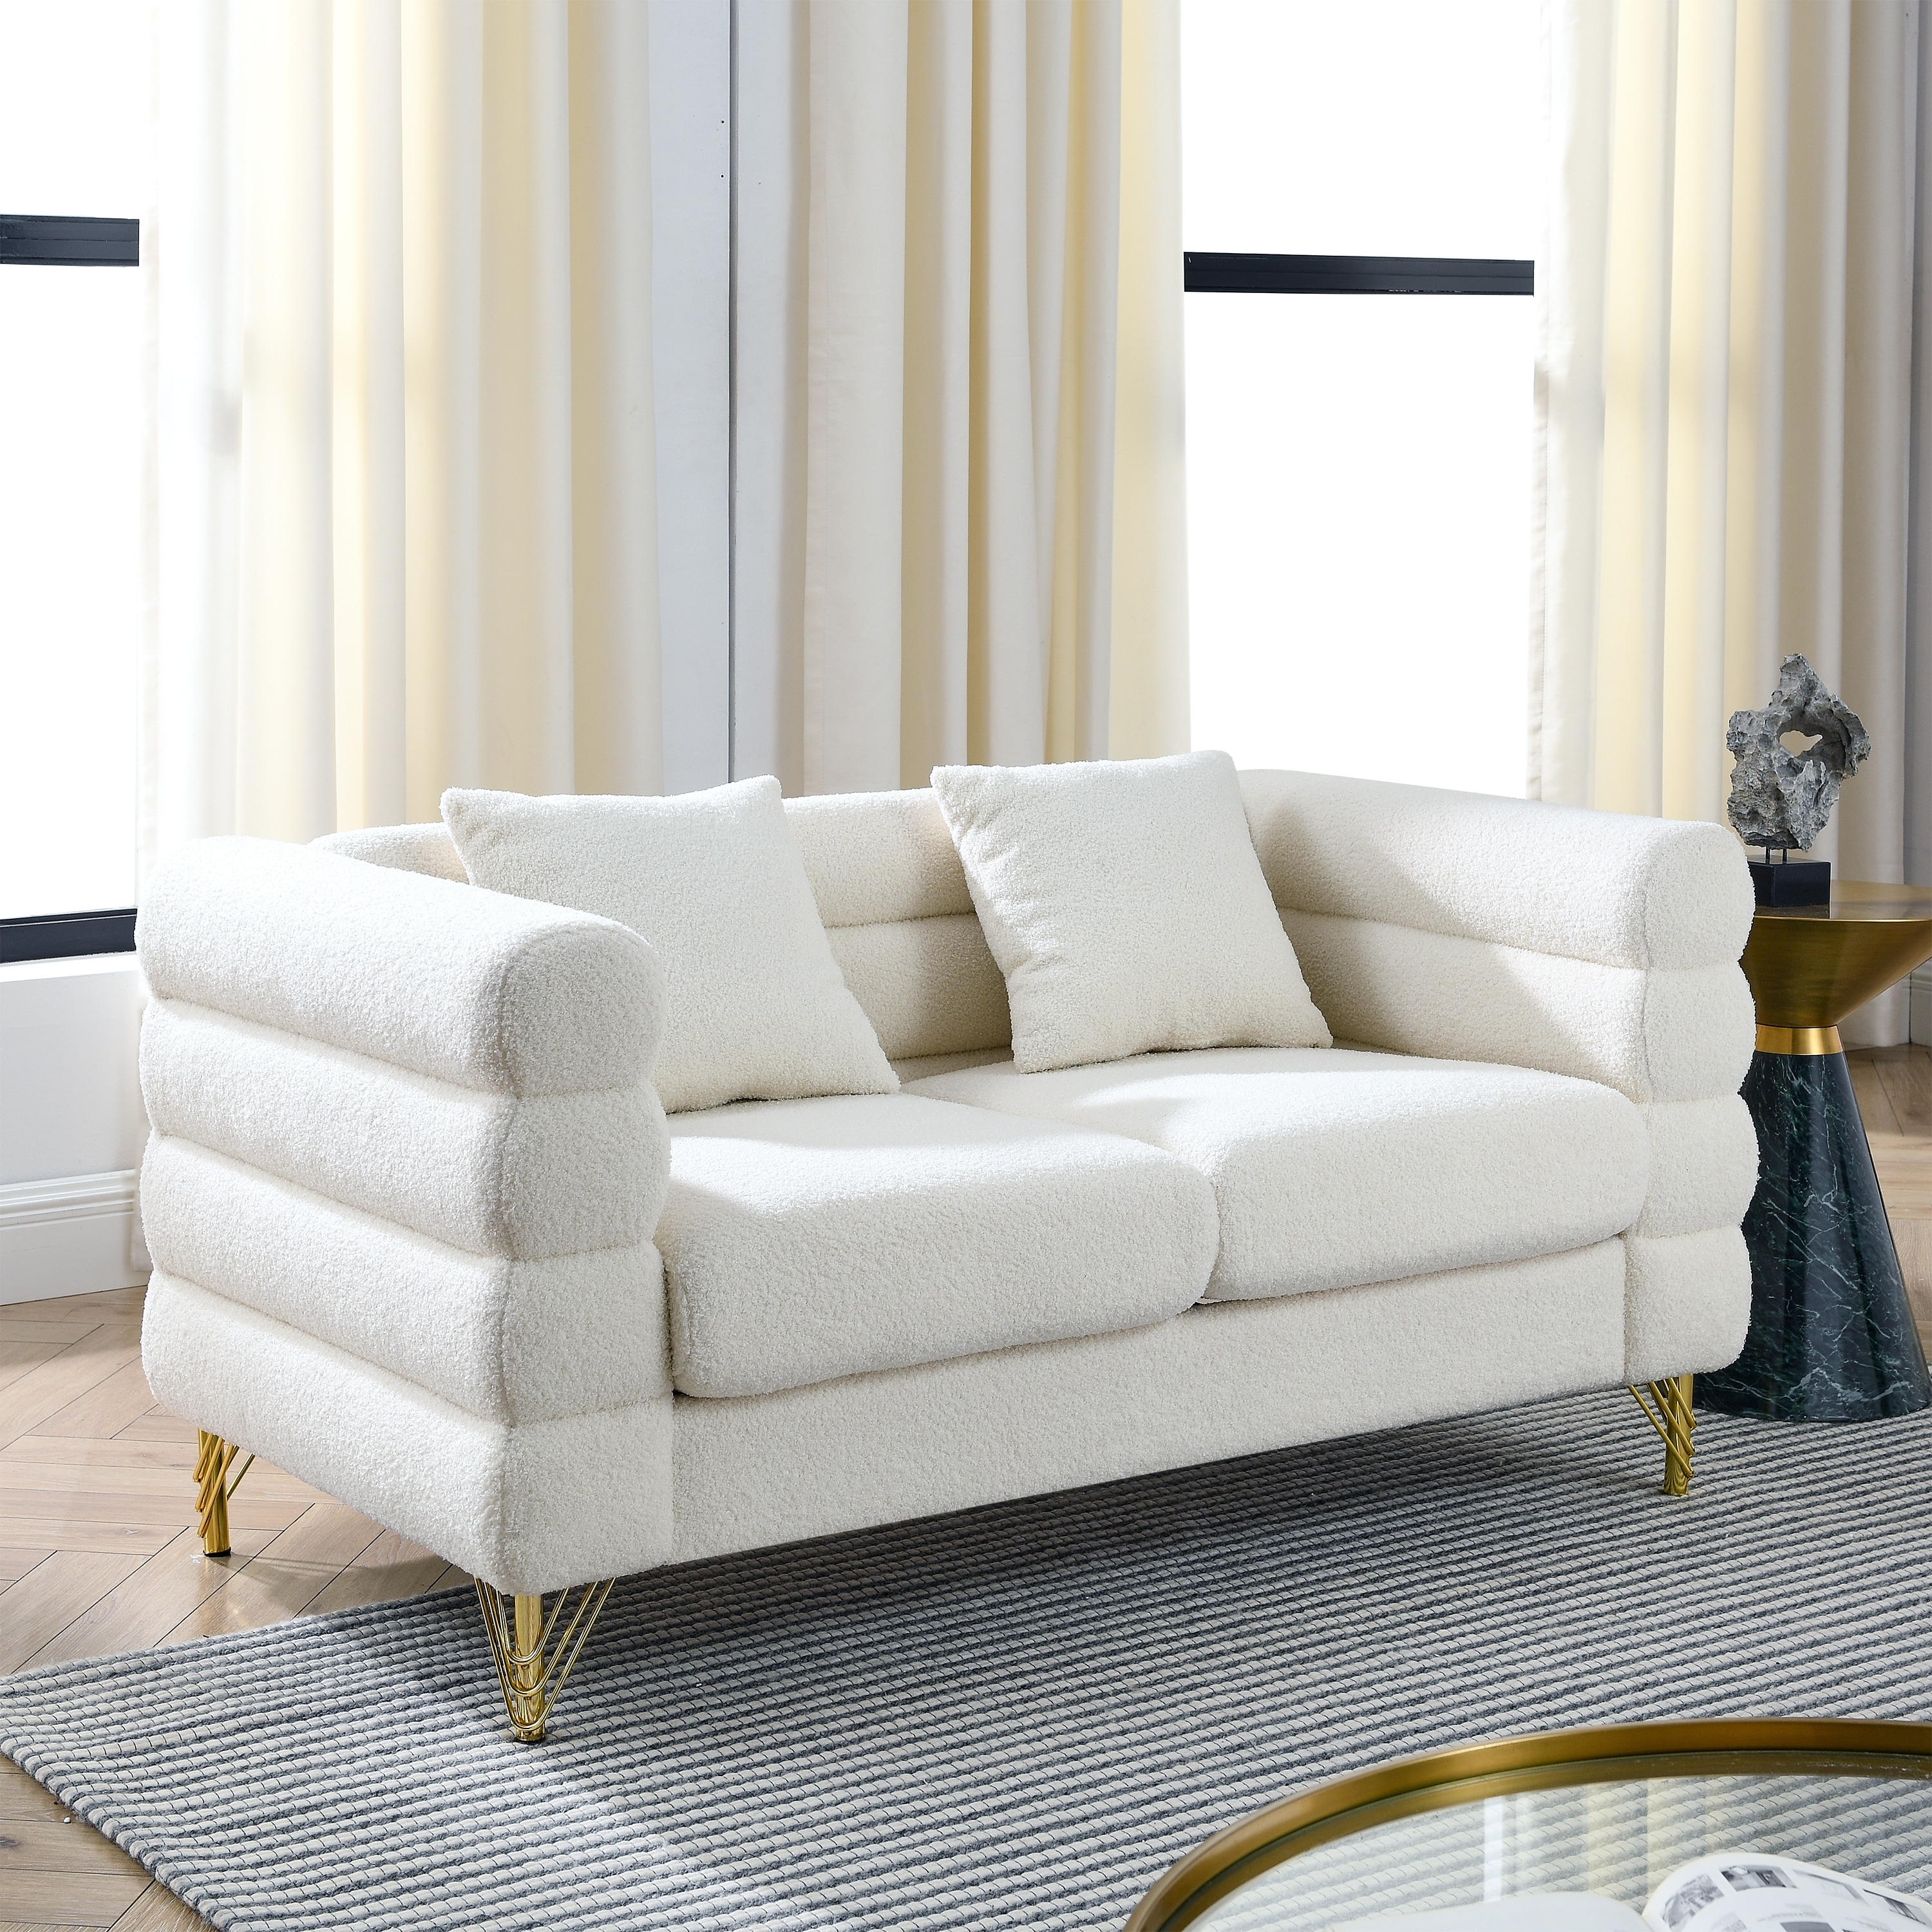 https://ak1.ostkcdn.com/images/products/is/images/direct/dcf45c19032433695465b6dc04608a69ec24b64d/Teddy-Fabric-Sofa-60%22-Tufted-Back-Loveseat-Modern-Upholstery-Couch-with-2-Throw-Pillows-and-Metal-Legs-for-Living-Room.jpg